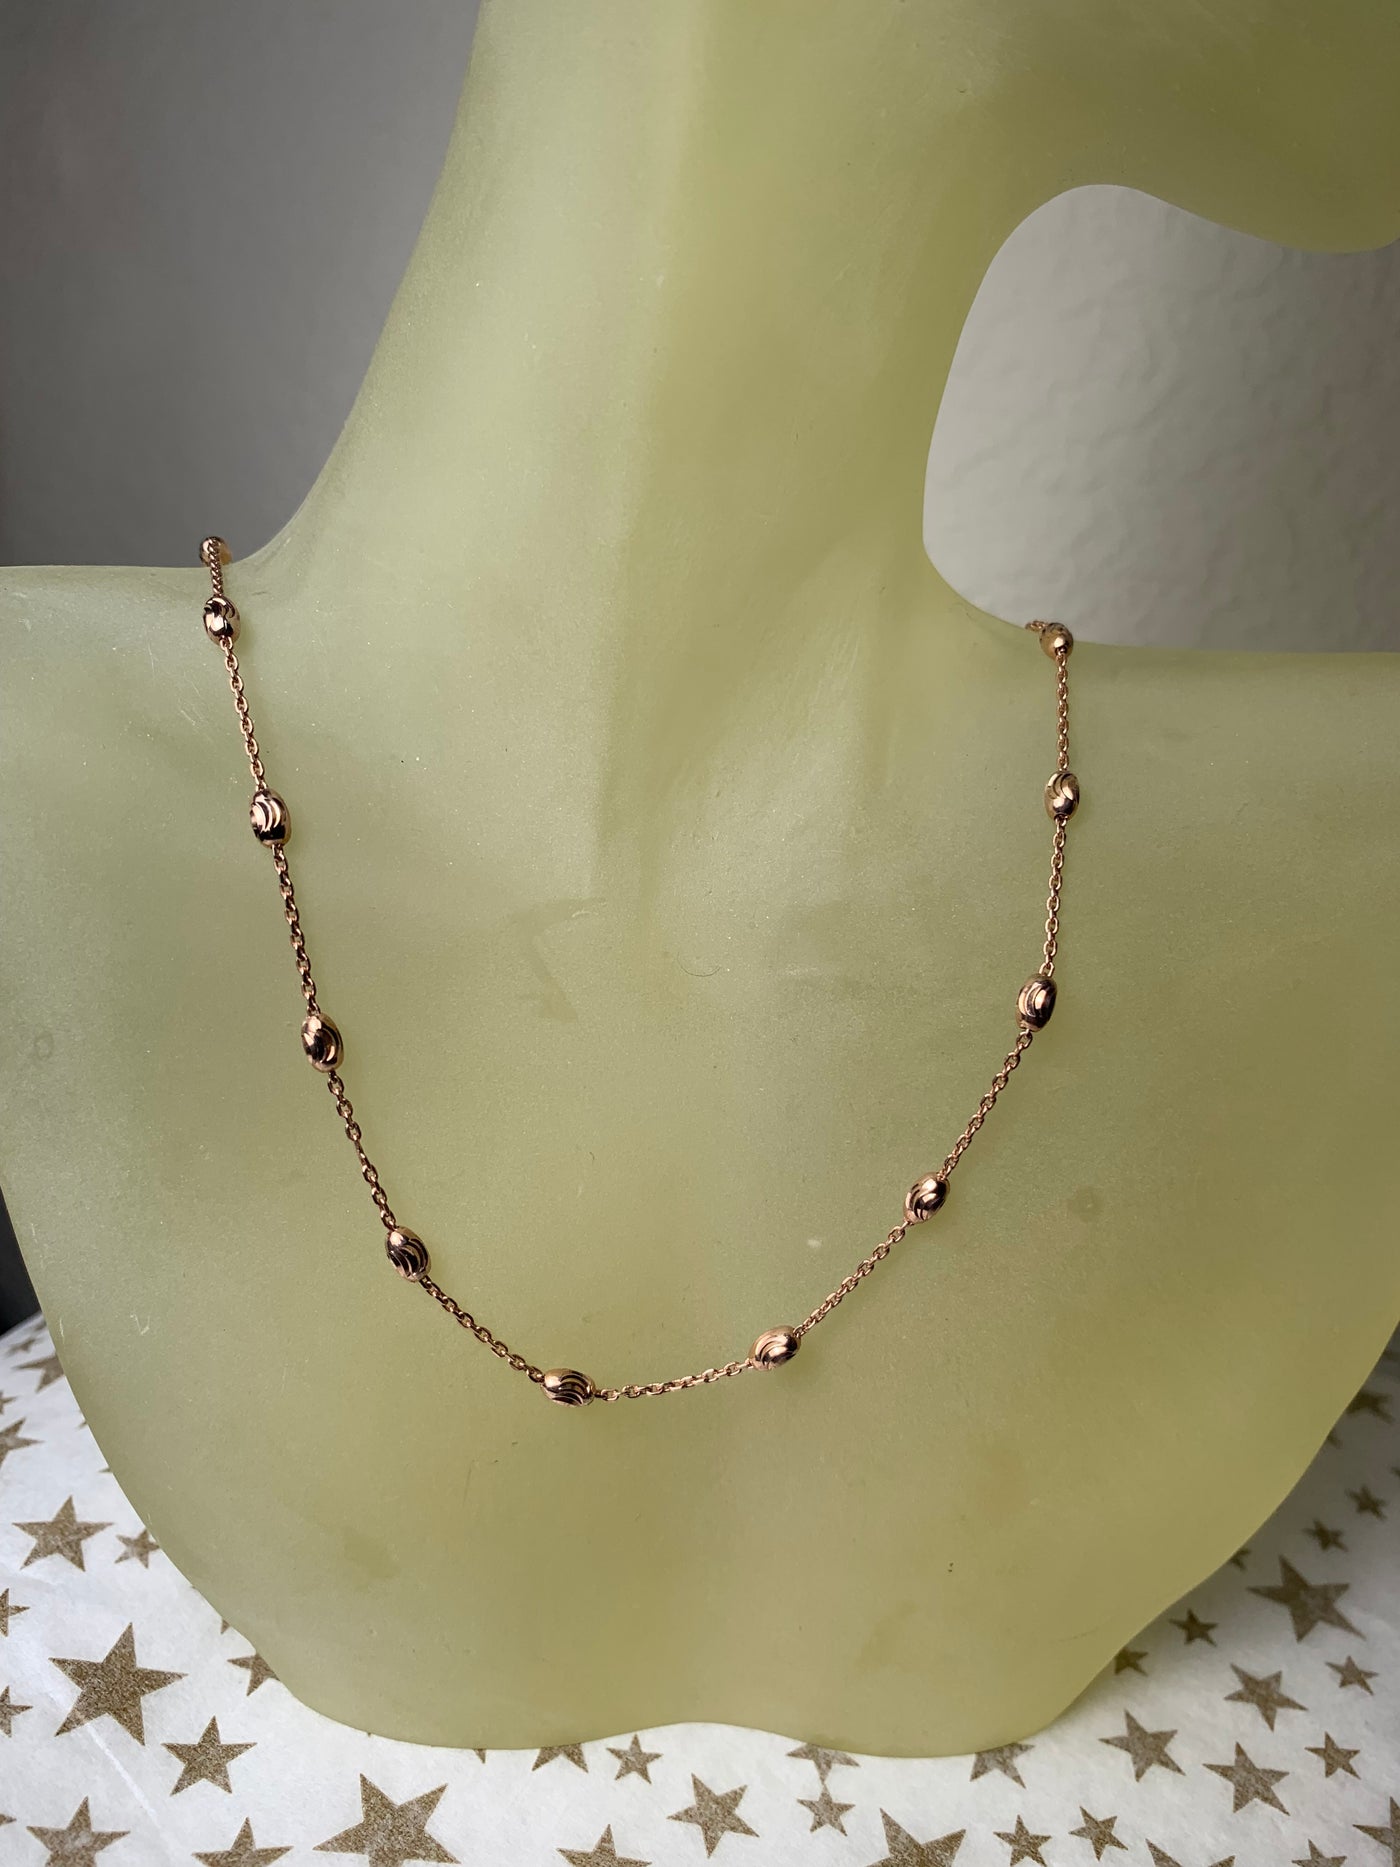 Sterling Silver Oval Ball Sectional Chain Necklace with Rose Gold Tone Coating, 16"